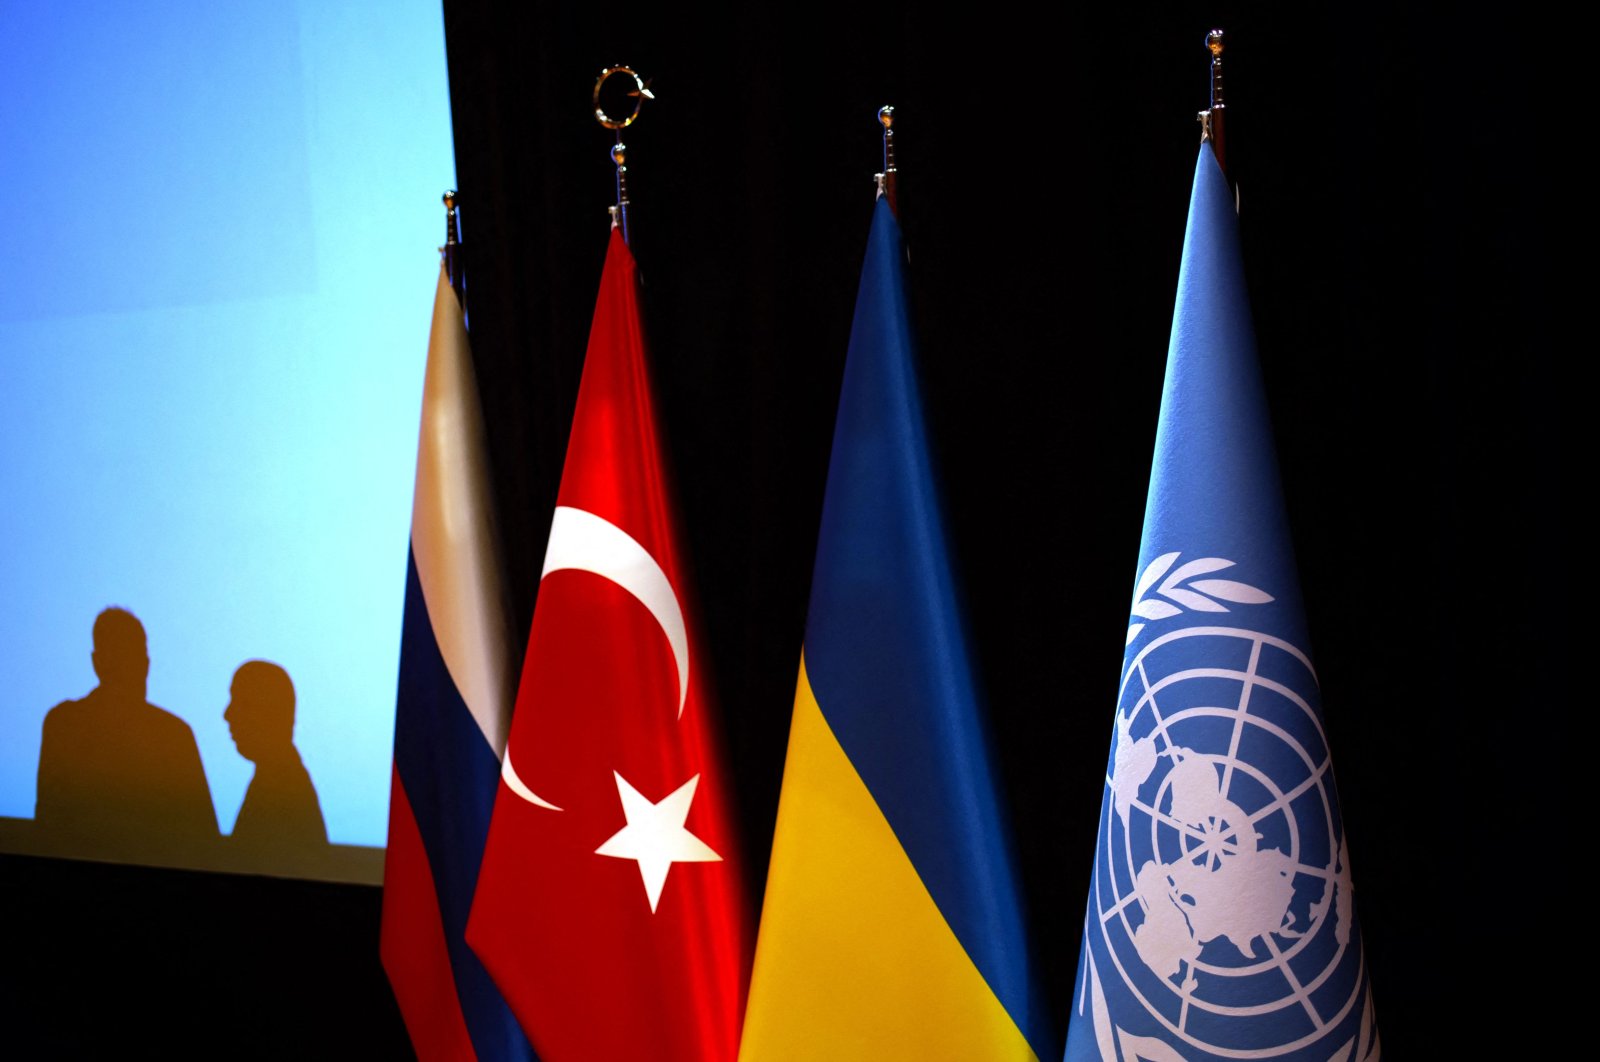 The flags representing (from L): Russia, Türkiye, Ukraine and the United Nations, decorate the stage where the Turkish National Defense Minister and the U.N. Secretary-General will hold a joint press conference at the Joint Coordination Center established in Istanbul for the safe shipment of grain products from the Black Sea region, Aug. 20, 2022. (AFP Photo)